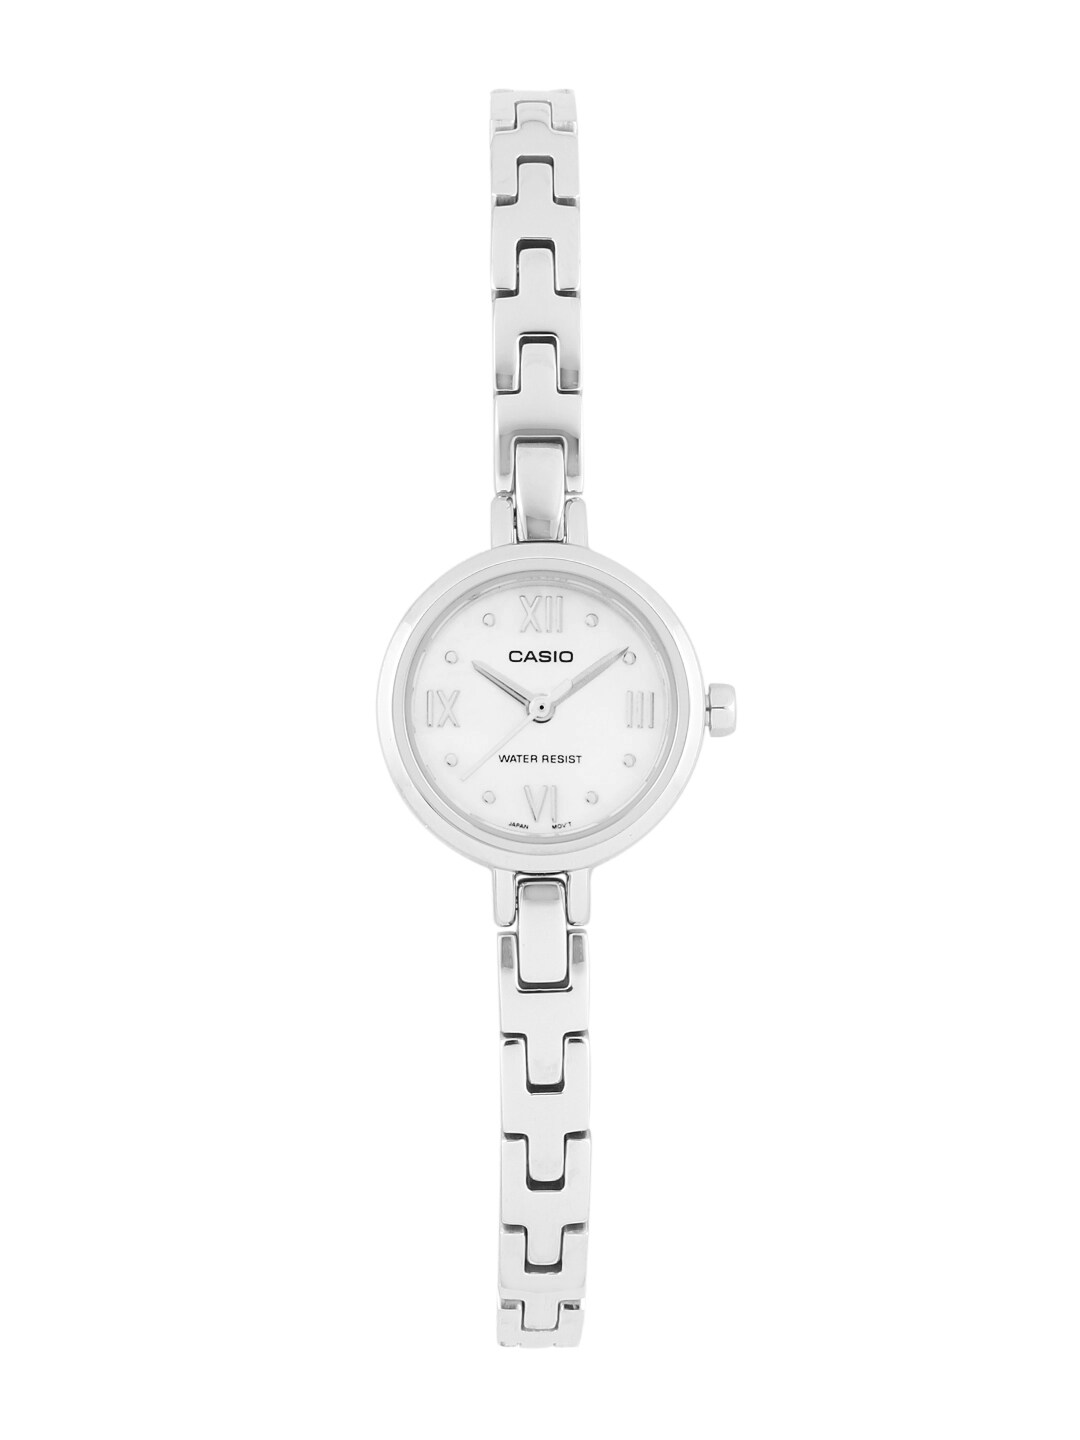 CASIO ENTICER Women White Dial Analogue Watch A655